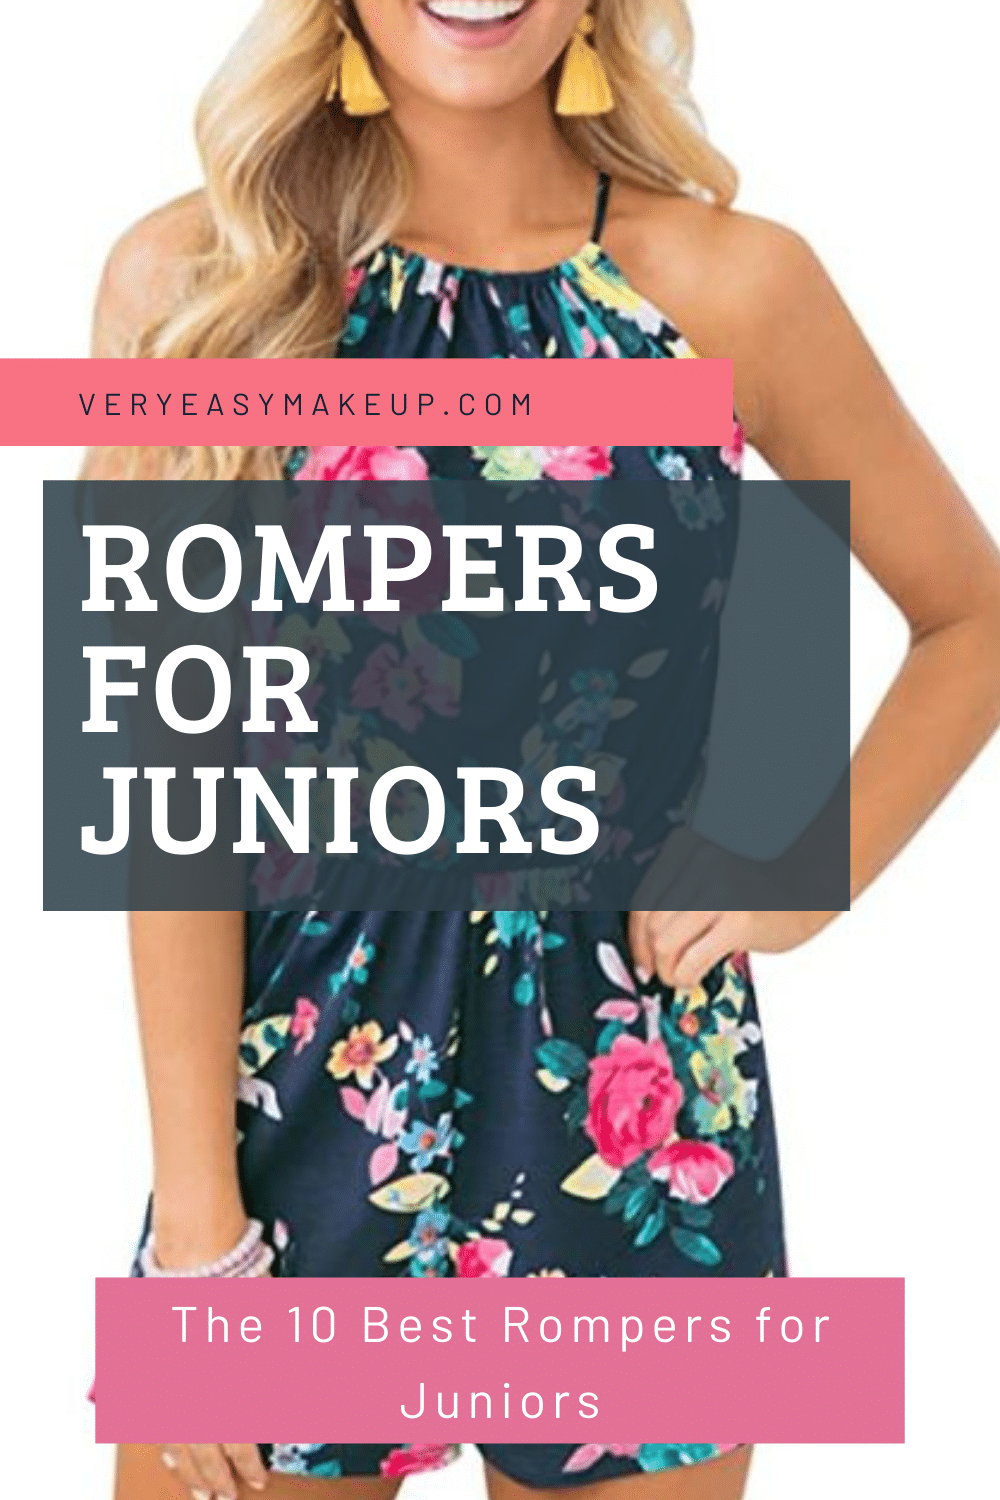 The 10 Best Rompers for Juniors by Very Easy Makeup